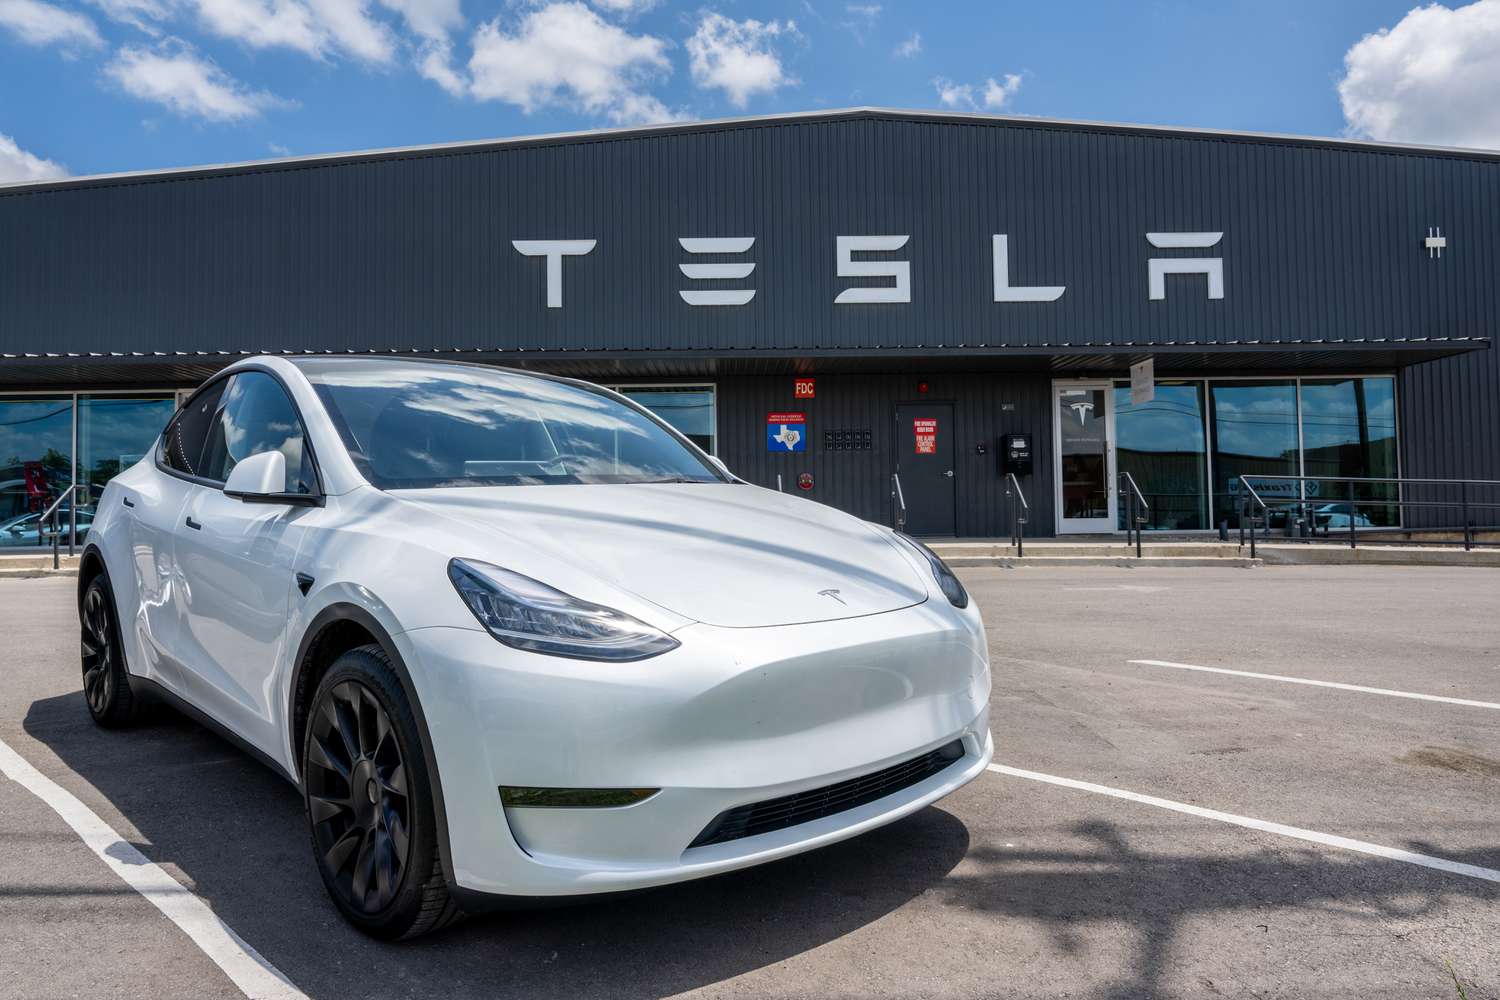 Tesla's Uphill Battle After Recent Controversy